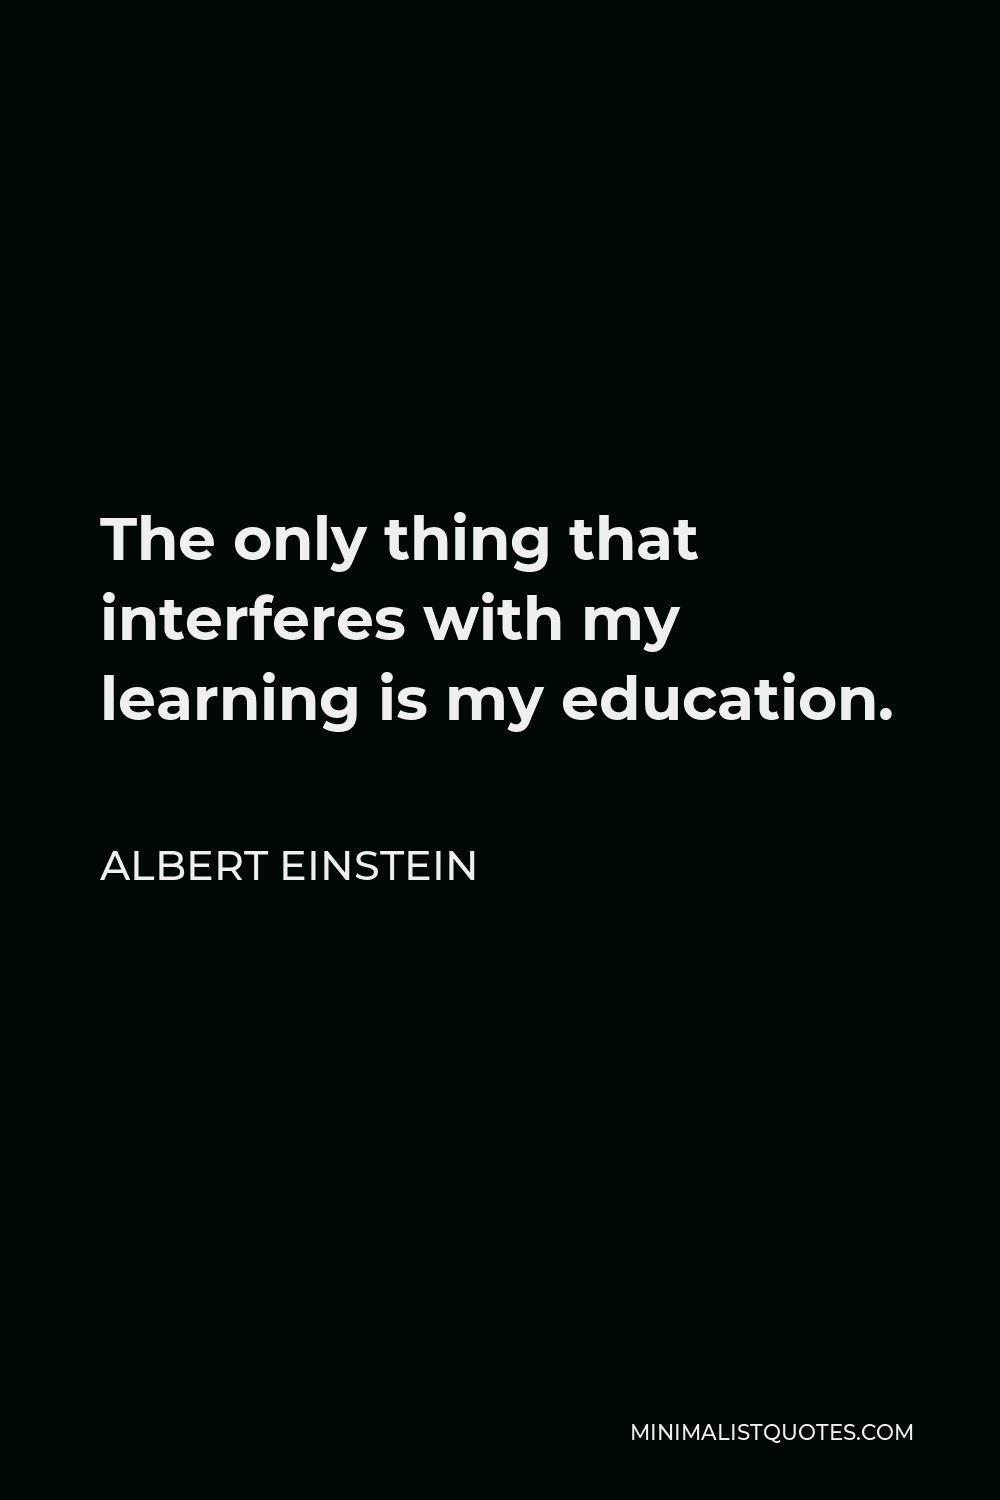 Albert Einstein Quote - The only thing that interferes with my learning is my education.